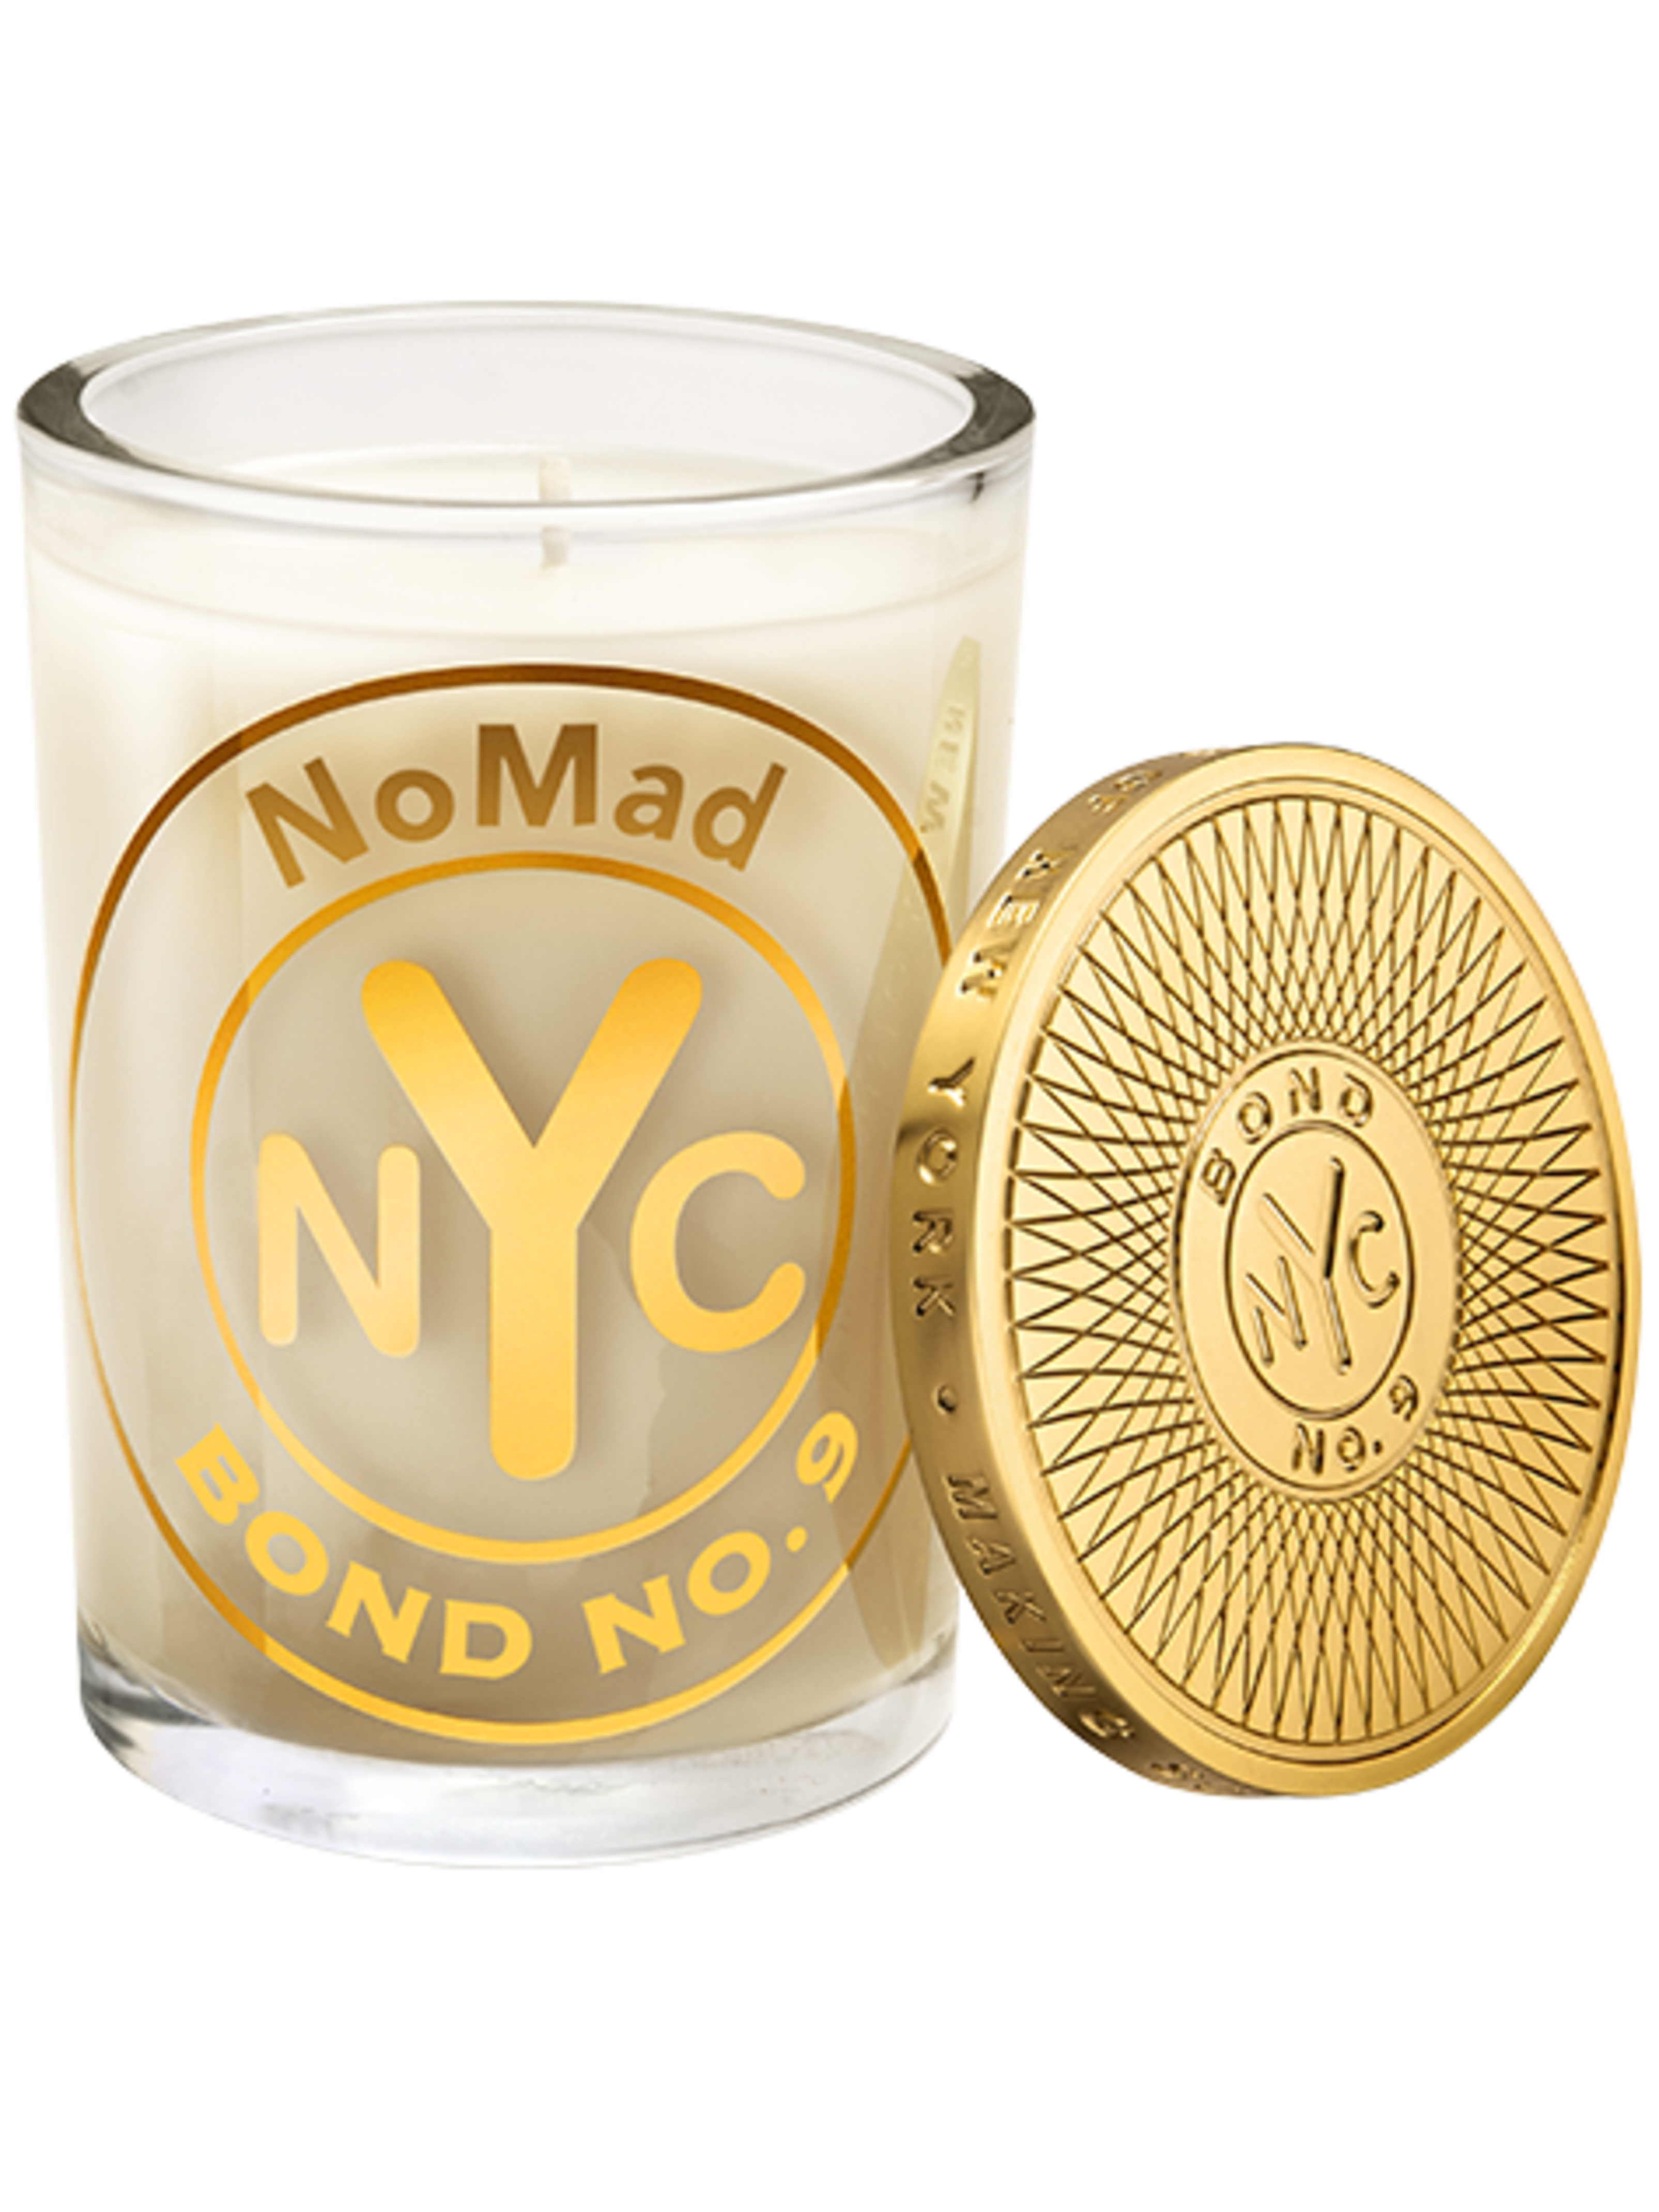 NoMad Scented Candle